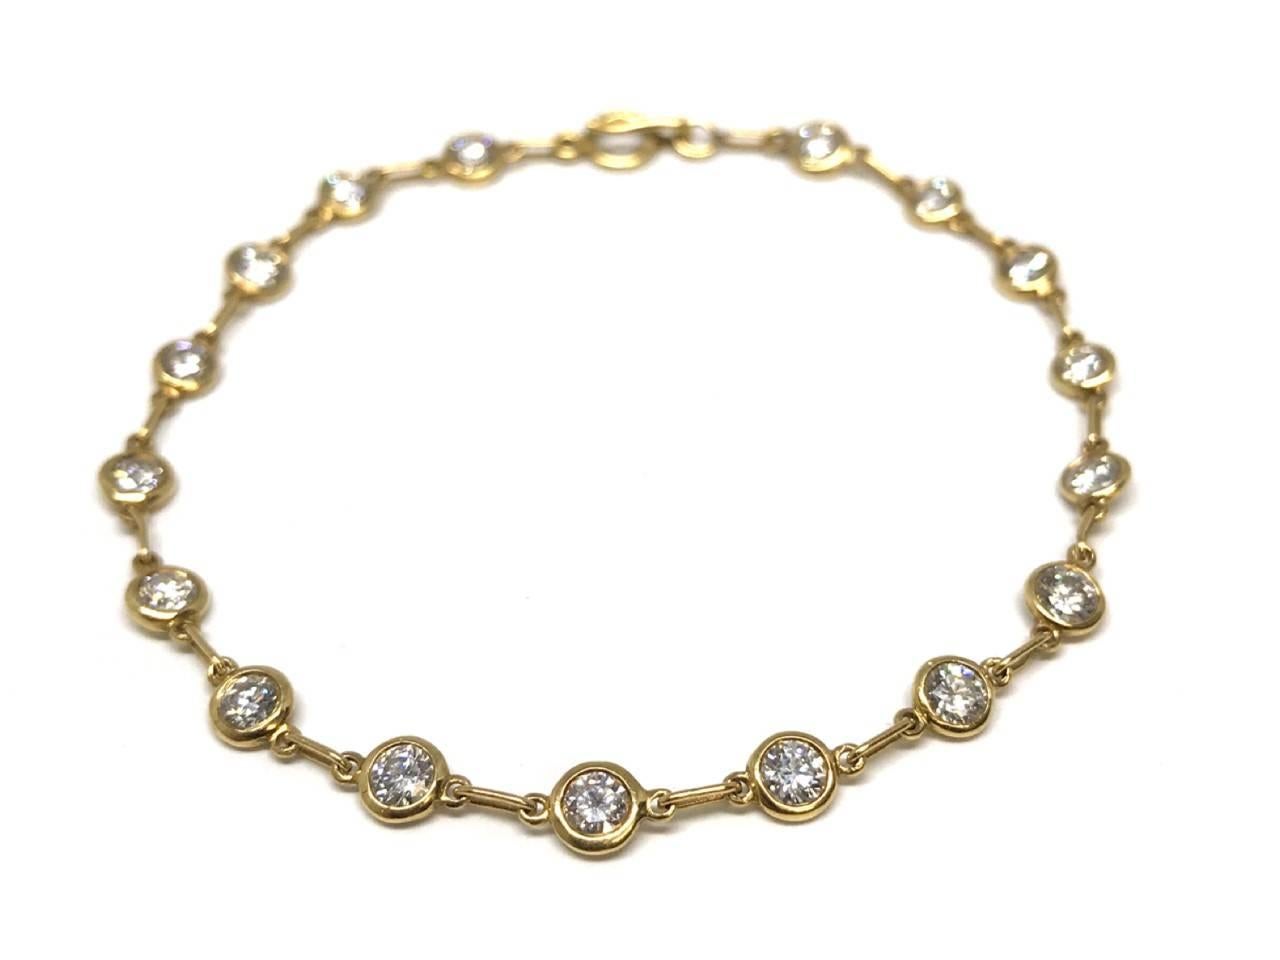 From the Elsa Peretti collection, this Tiffany & Co bracelet features 17 round cut diamonds housed in 18k gold.
The diamonds catch light at all angles, making this a great compliment to all moods, a subtle but strong look.
This was a special